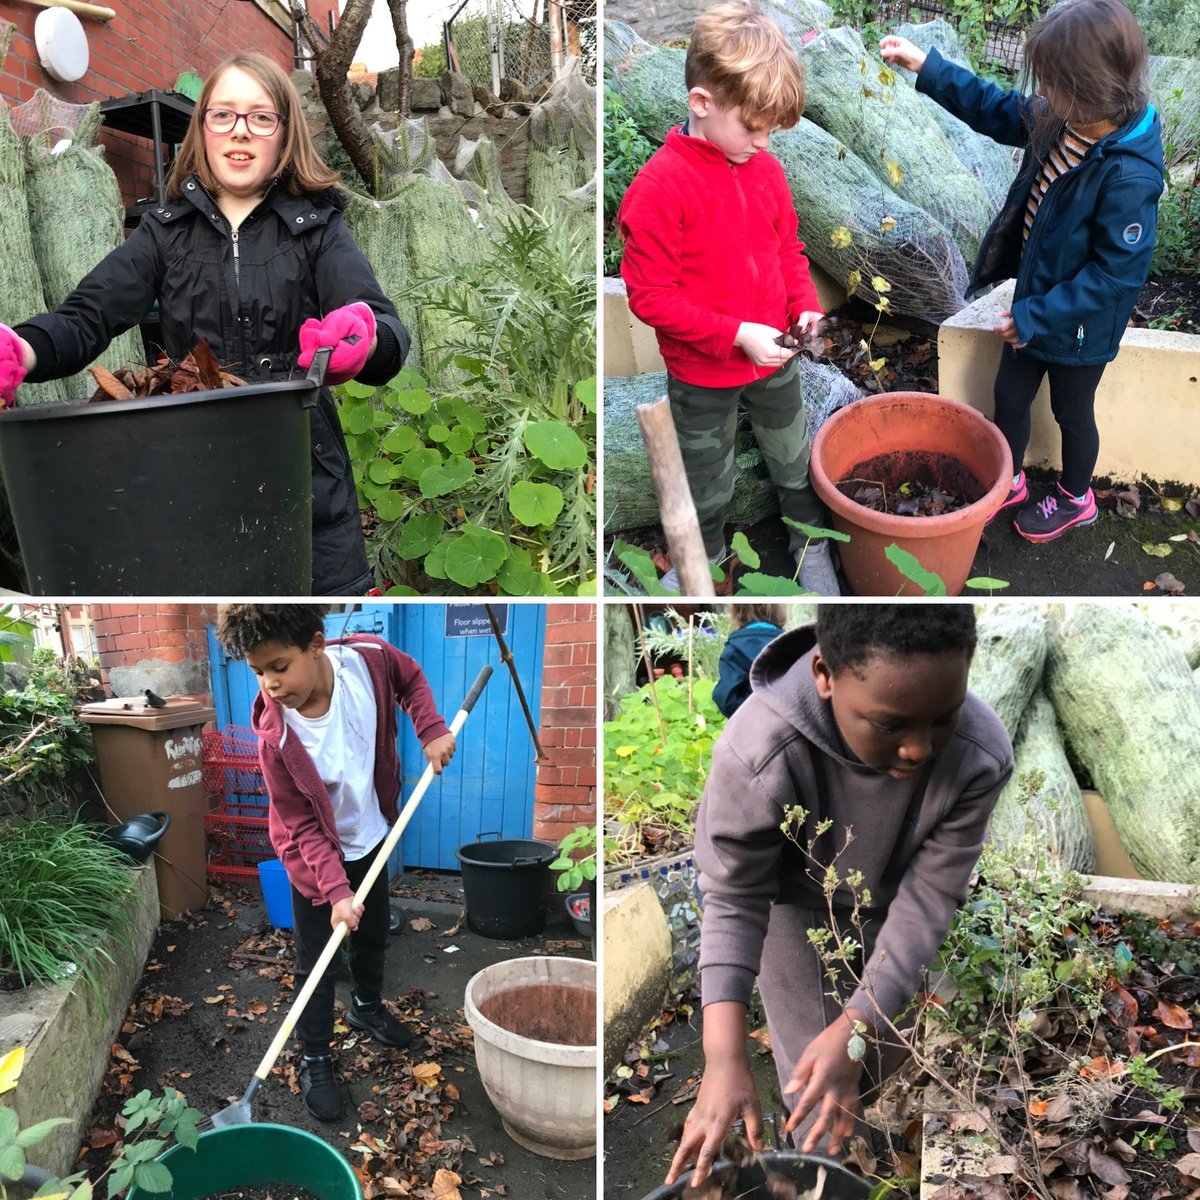 Our dedicated Green Team have been in the Garden for Life, sweeping up the last of autumn and composting the leaves. Local environment heroes!

#WeAreLocalCitizens #WeAreGlobalCitizens